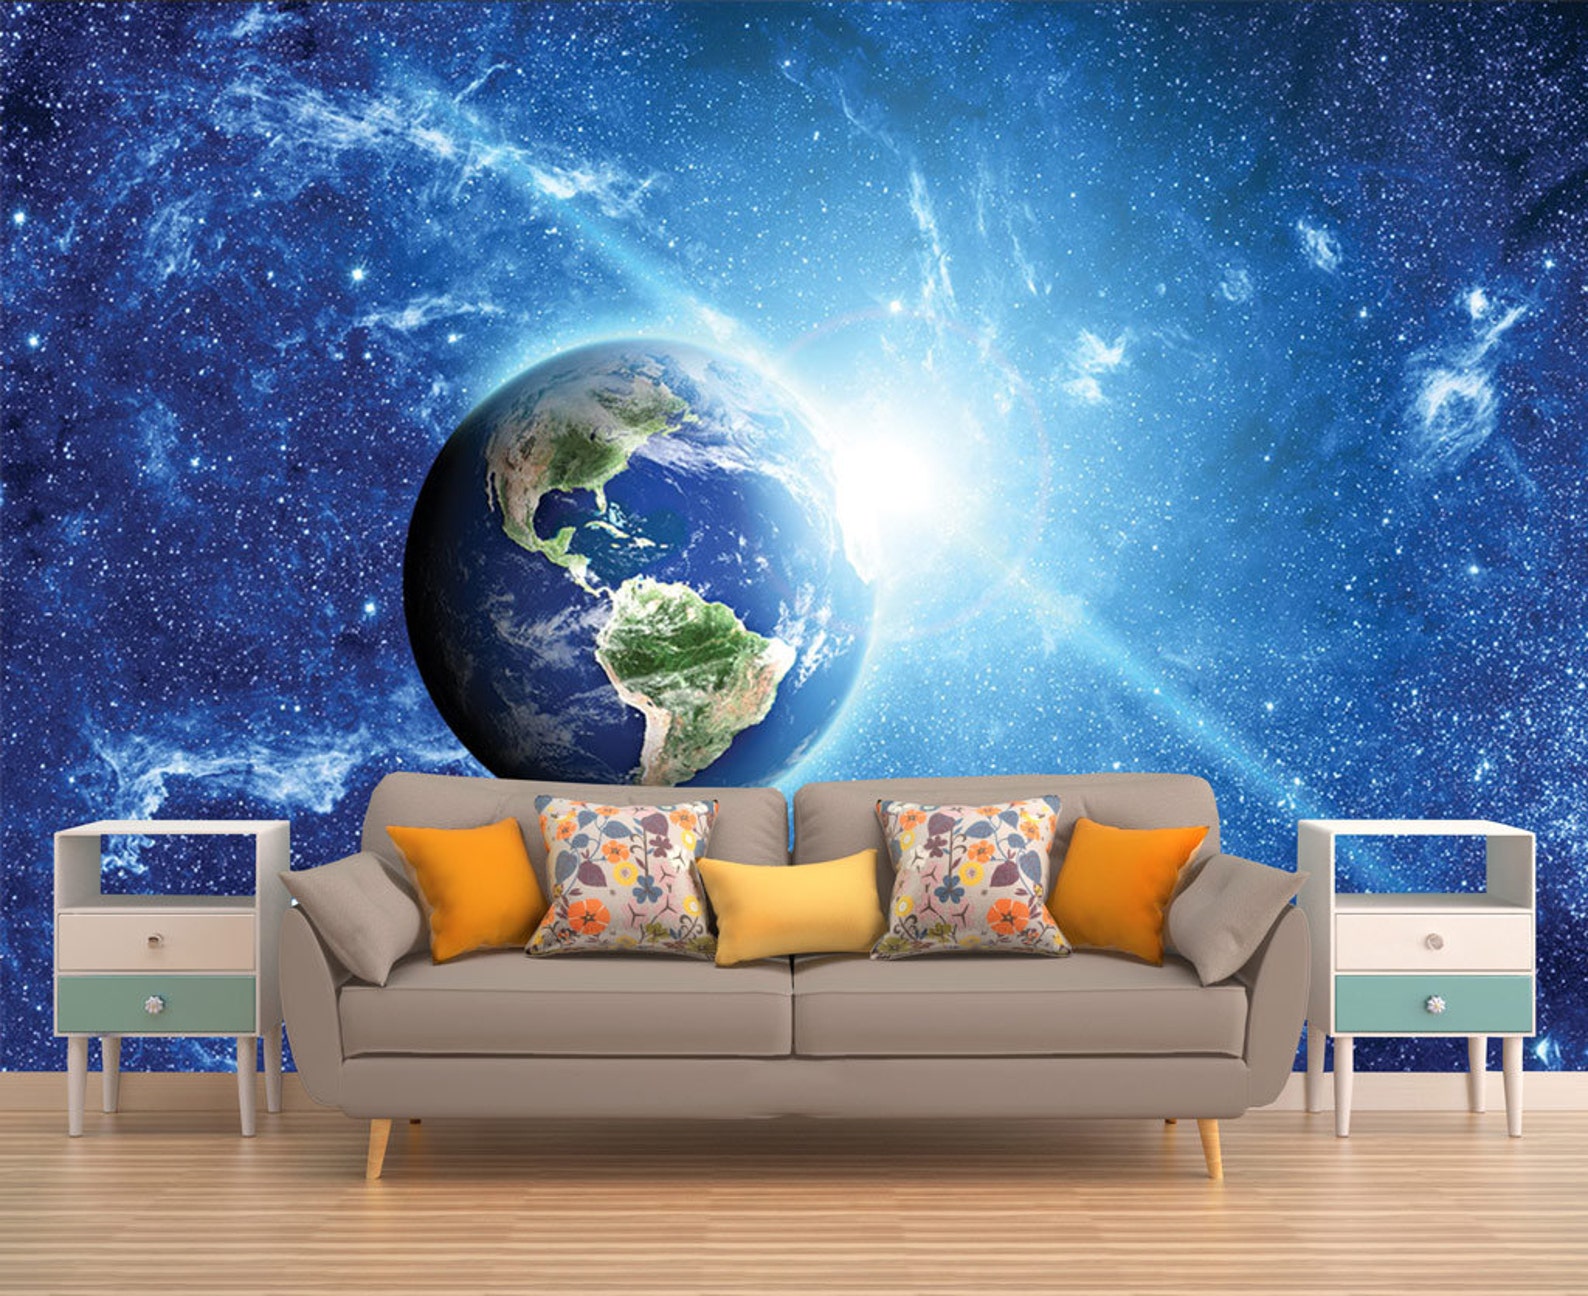 Space Wall Mural Outer Space Wall Mural Galaxy Wallpaper - Etsy